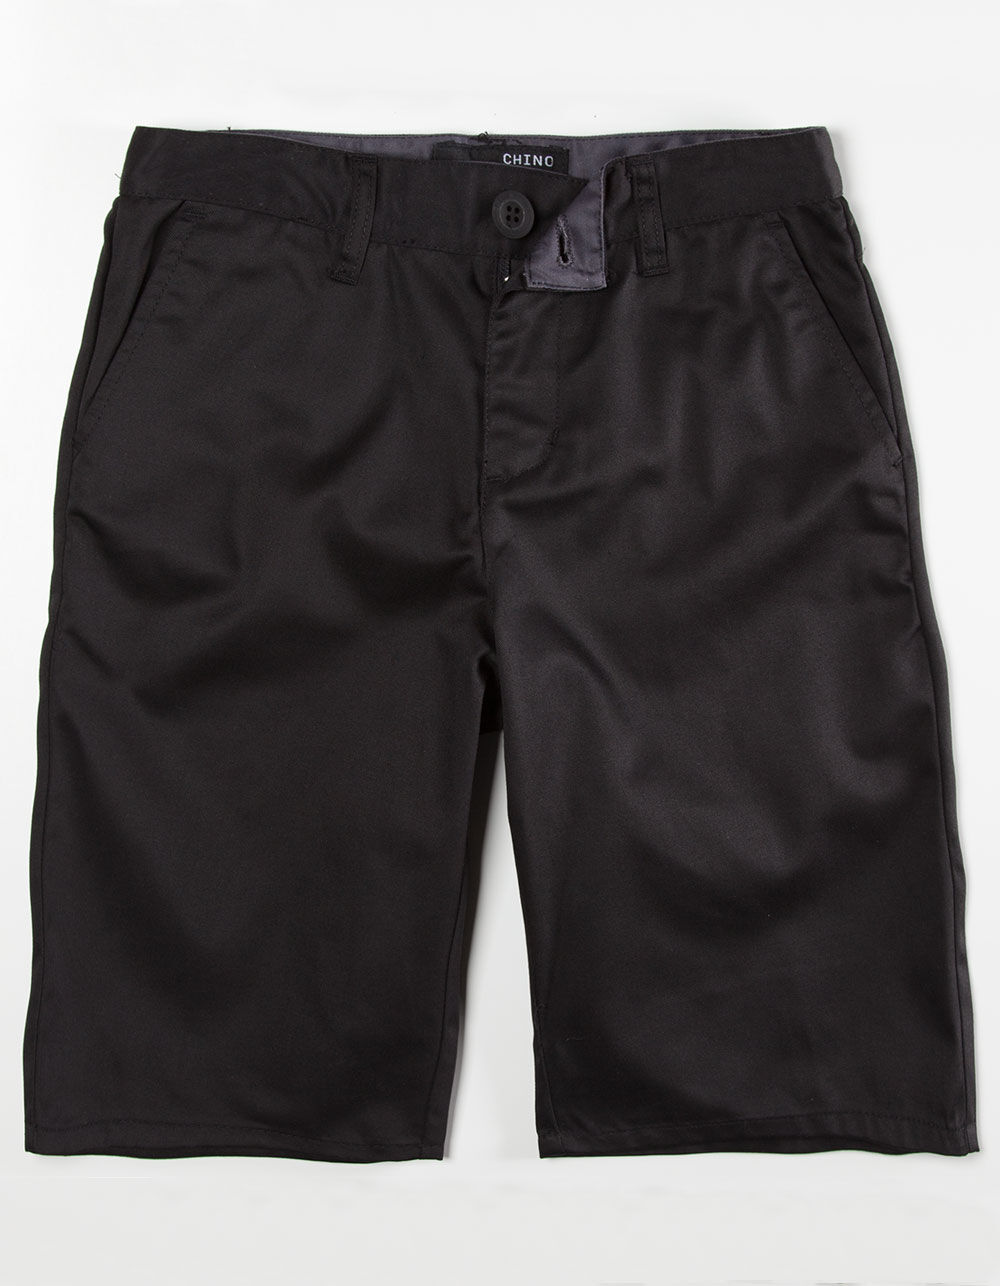 BLUE CROWN Chino Boys Shorts image number 0